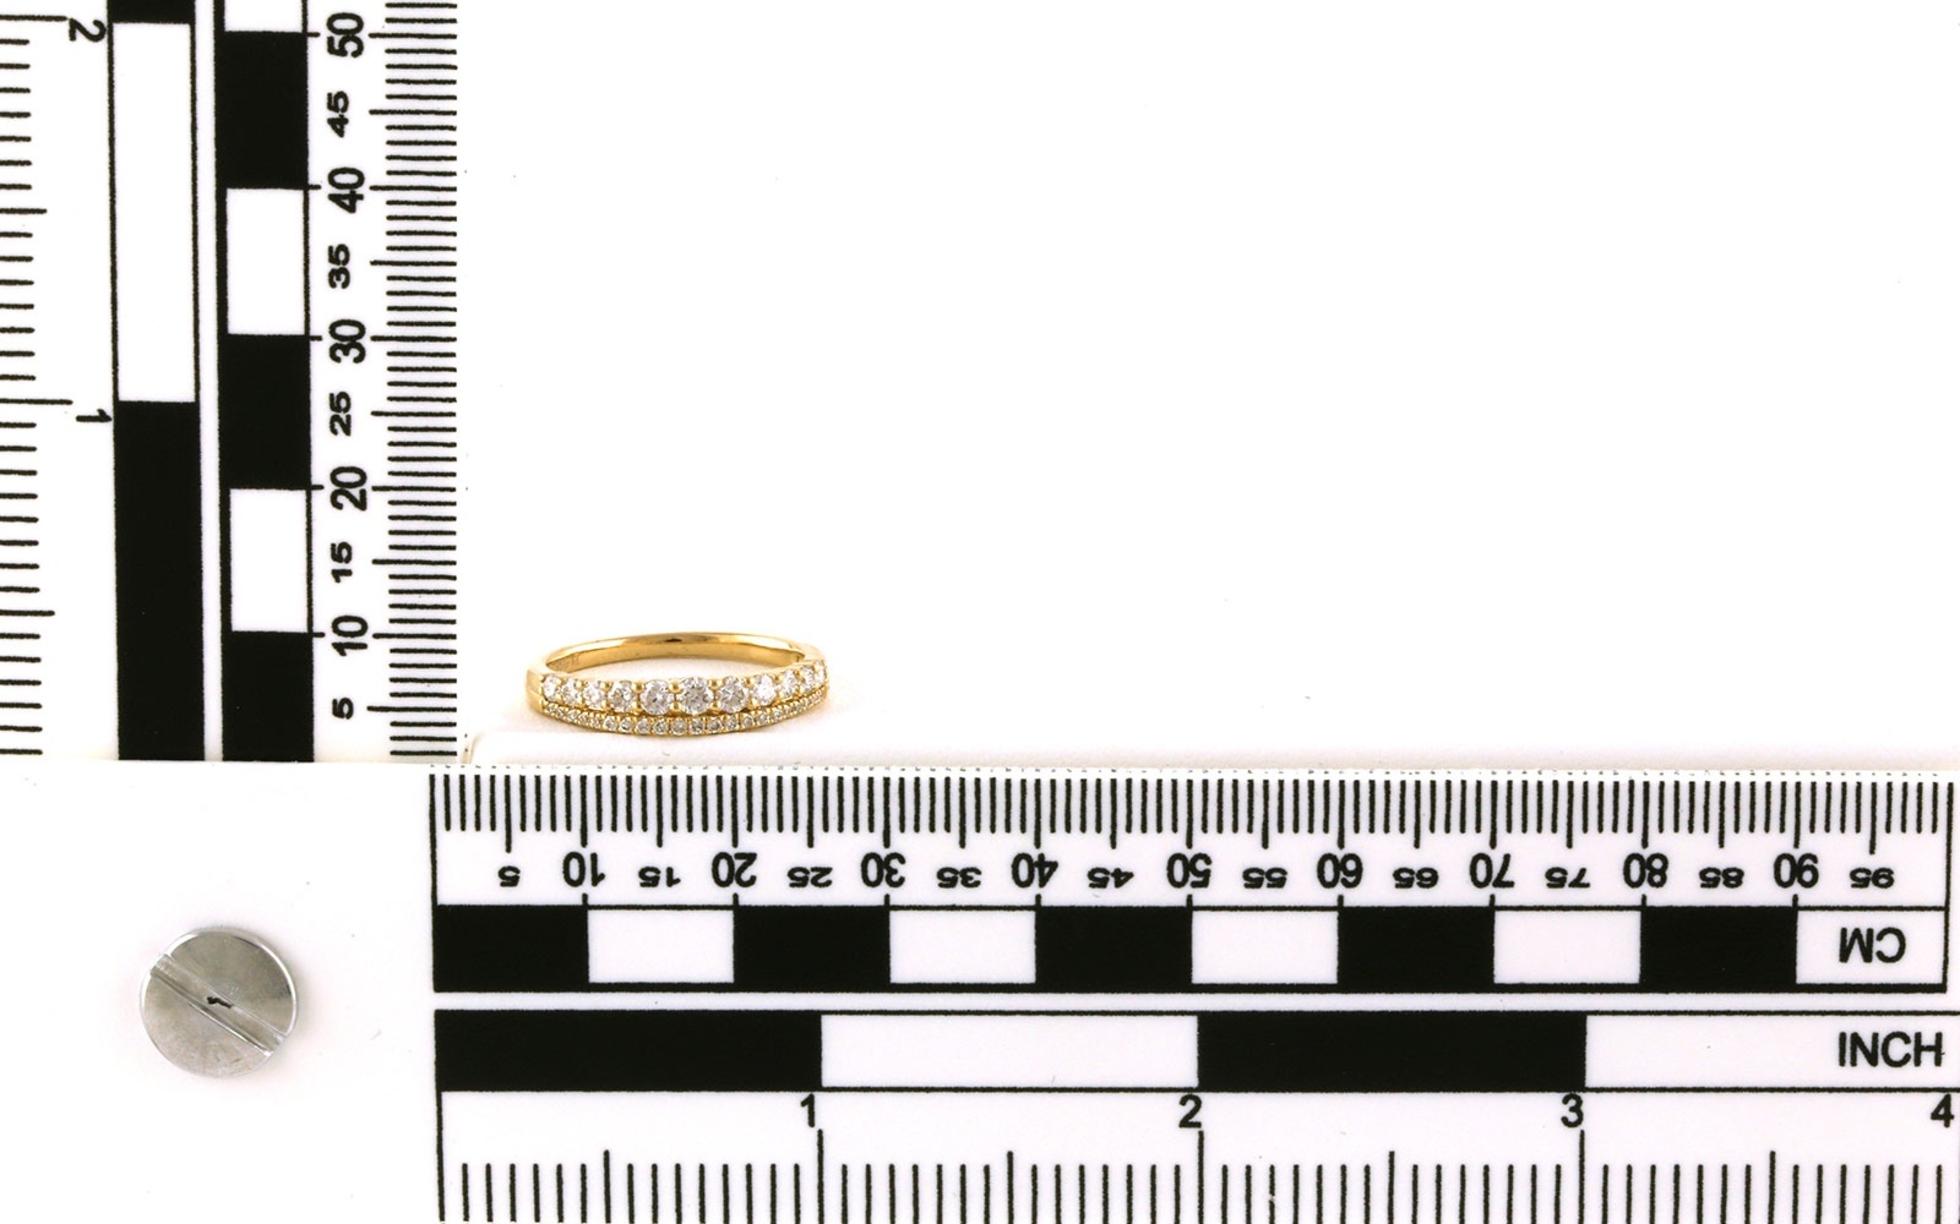 2-Row Graduated Pave Diamond Wedding Band in Yellow Gold (0.53cts TWT) Scale